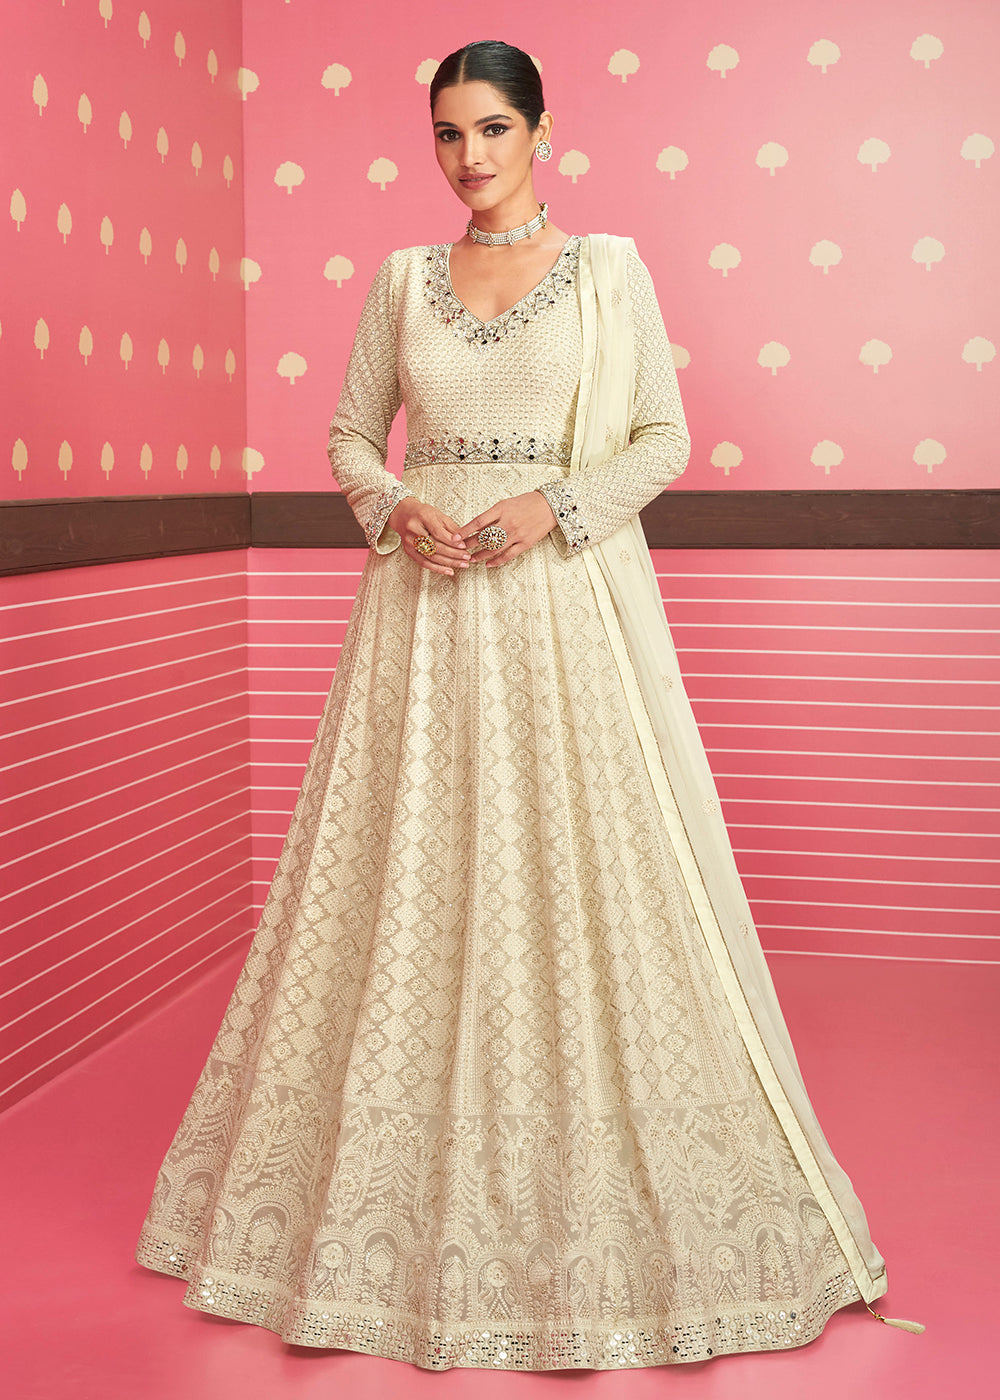 Buy Now Off White Lucknowi Chikankari Embroidered Bridesmaid Anarkali Suit Online in USA, UK, Australia, New Zealand, Canada & Worldwide at Empress Clothing.